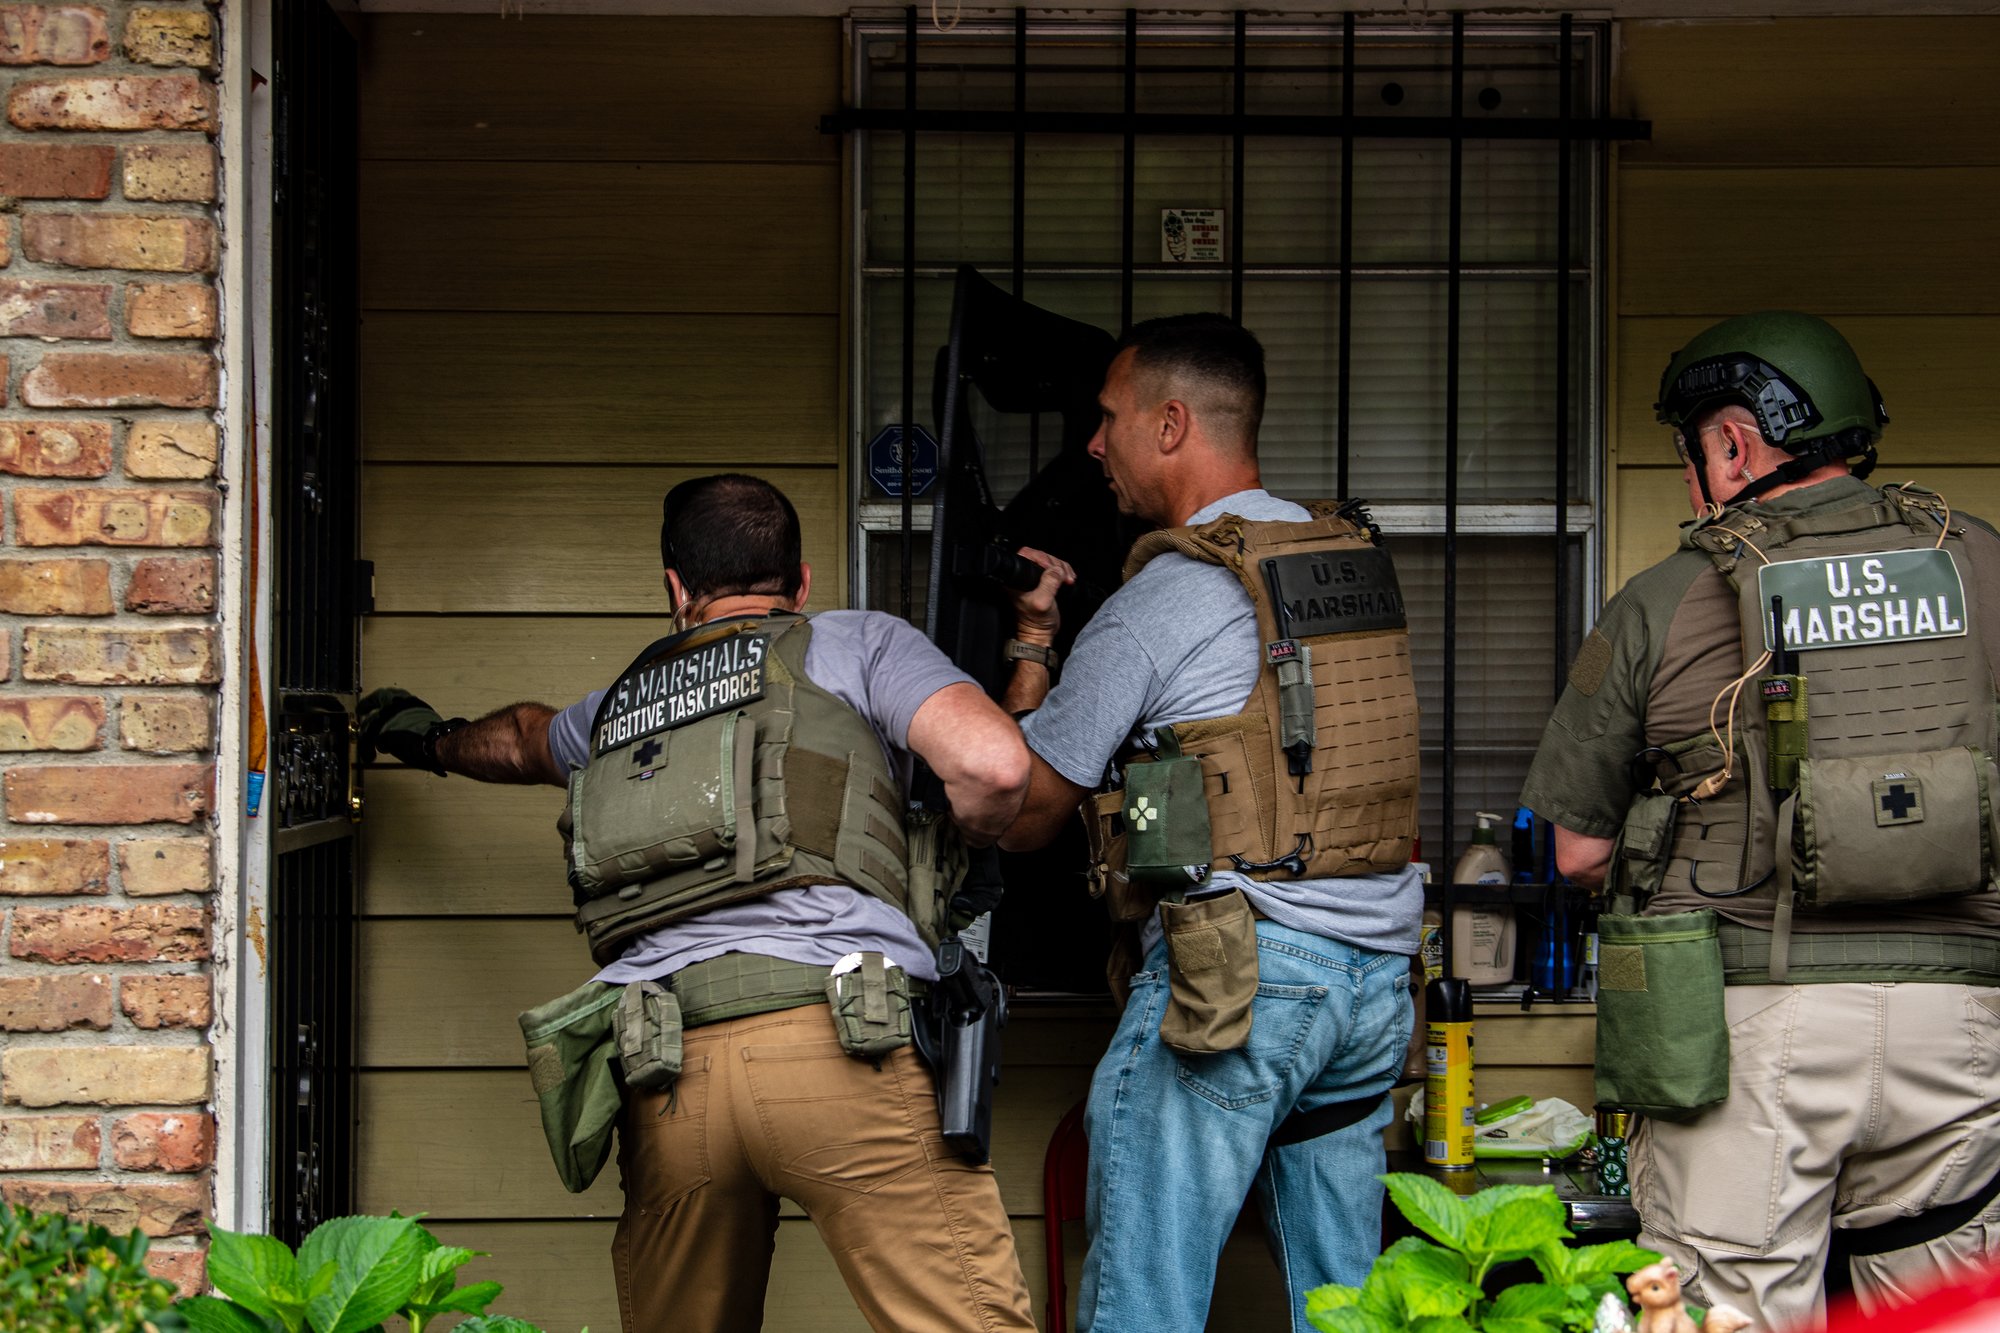 Members of the US Marshals Fugitive Task Force the moment they attempt to breach a house to serve an arrest warrant in the Memphis area on June 7, 2022. US Marshals Service photo.